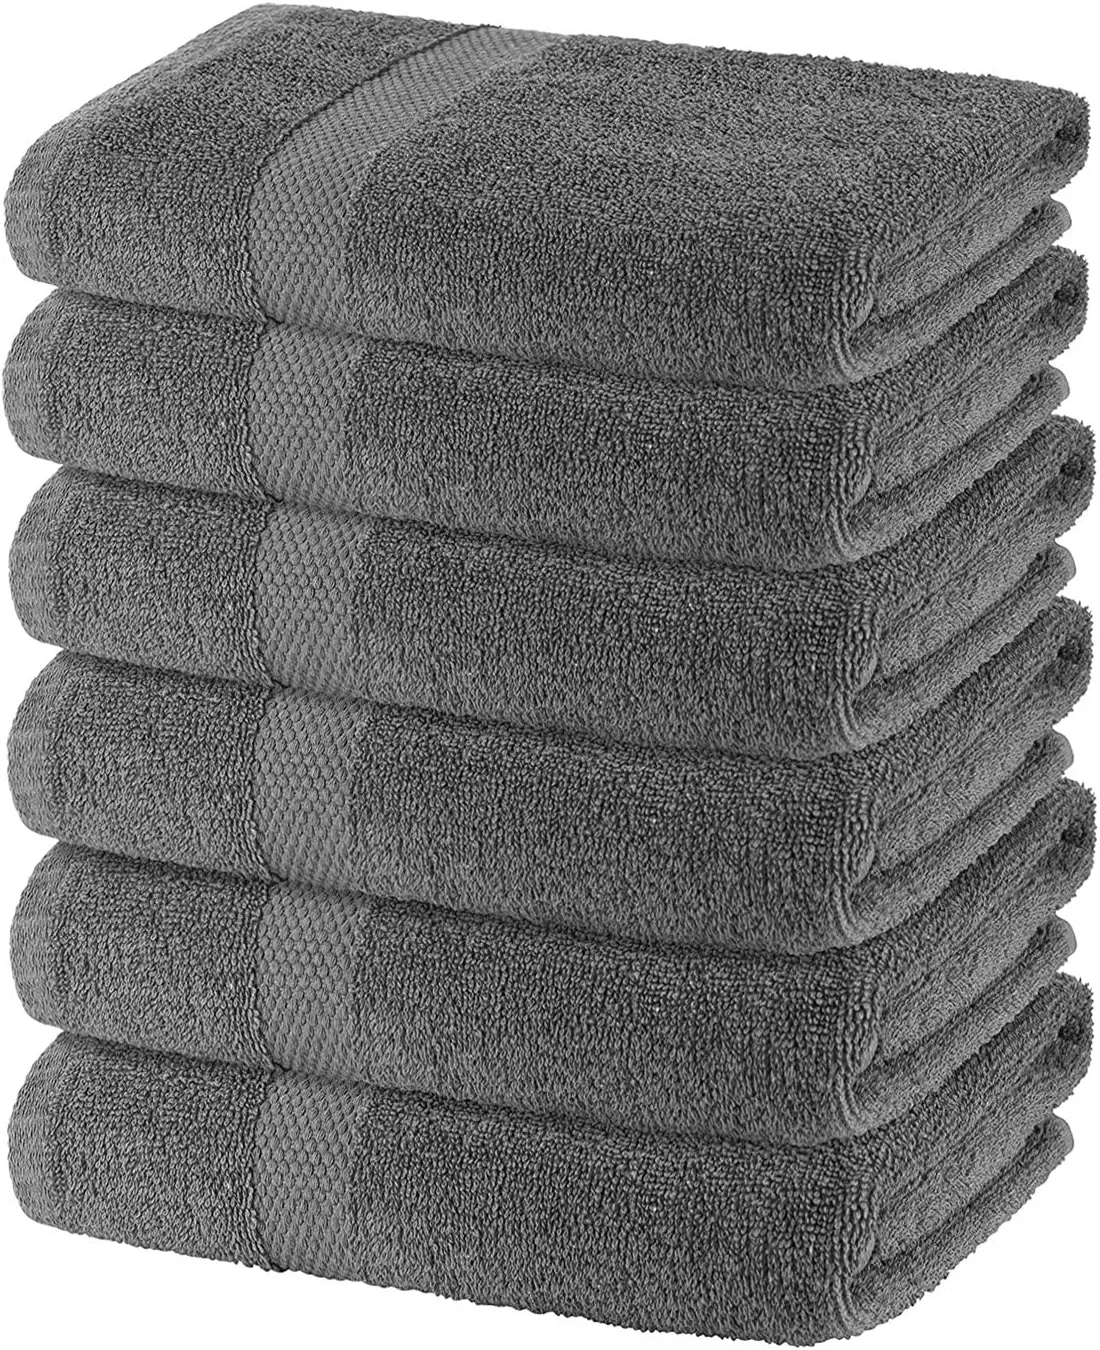 White Classic Wealuxe Grey Towels for Bathroom 6 Pack, Cotton Bath Towel  Set for Hotel, Gym, Spa, Soft Extra Absorbent Quick Dry 24x50 Inch